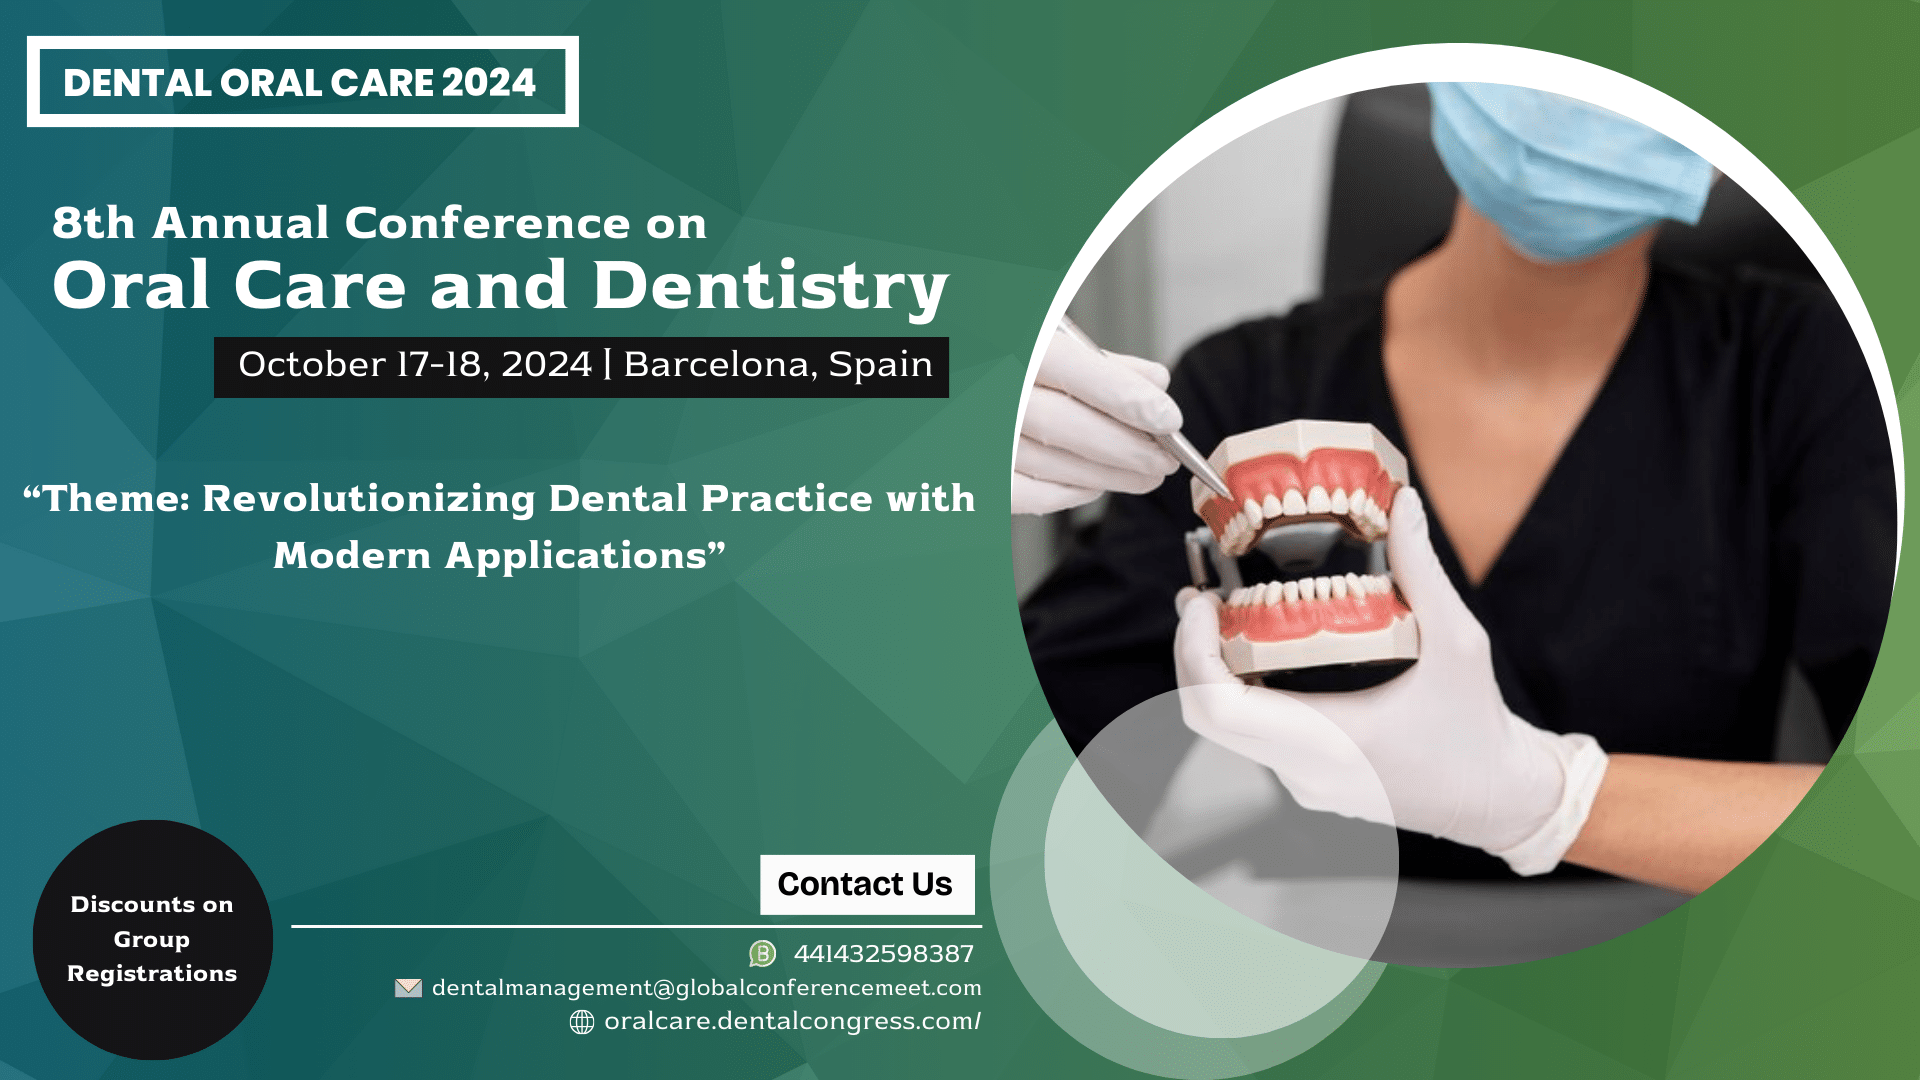 8th Annual Conference on Oral Care and Dentistry